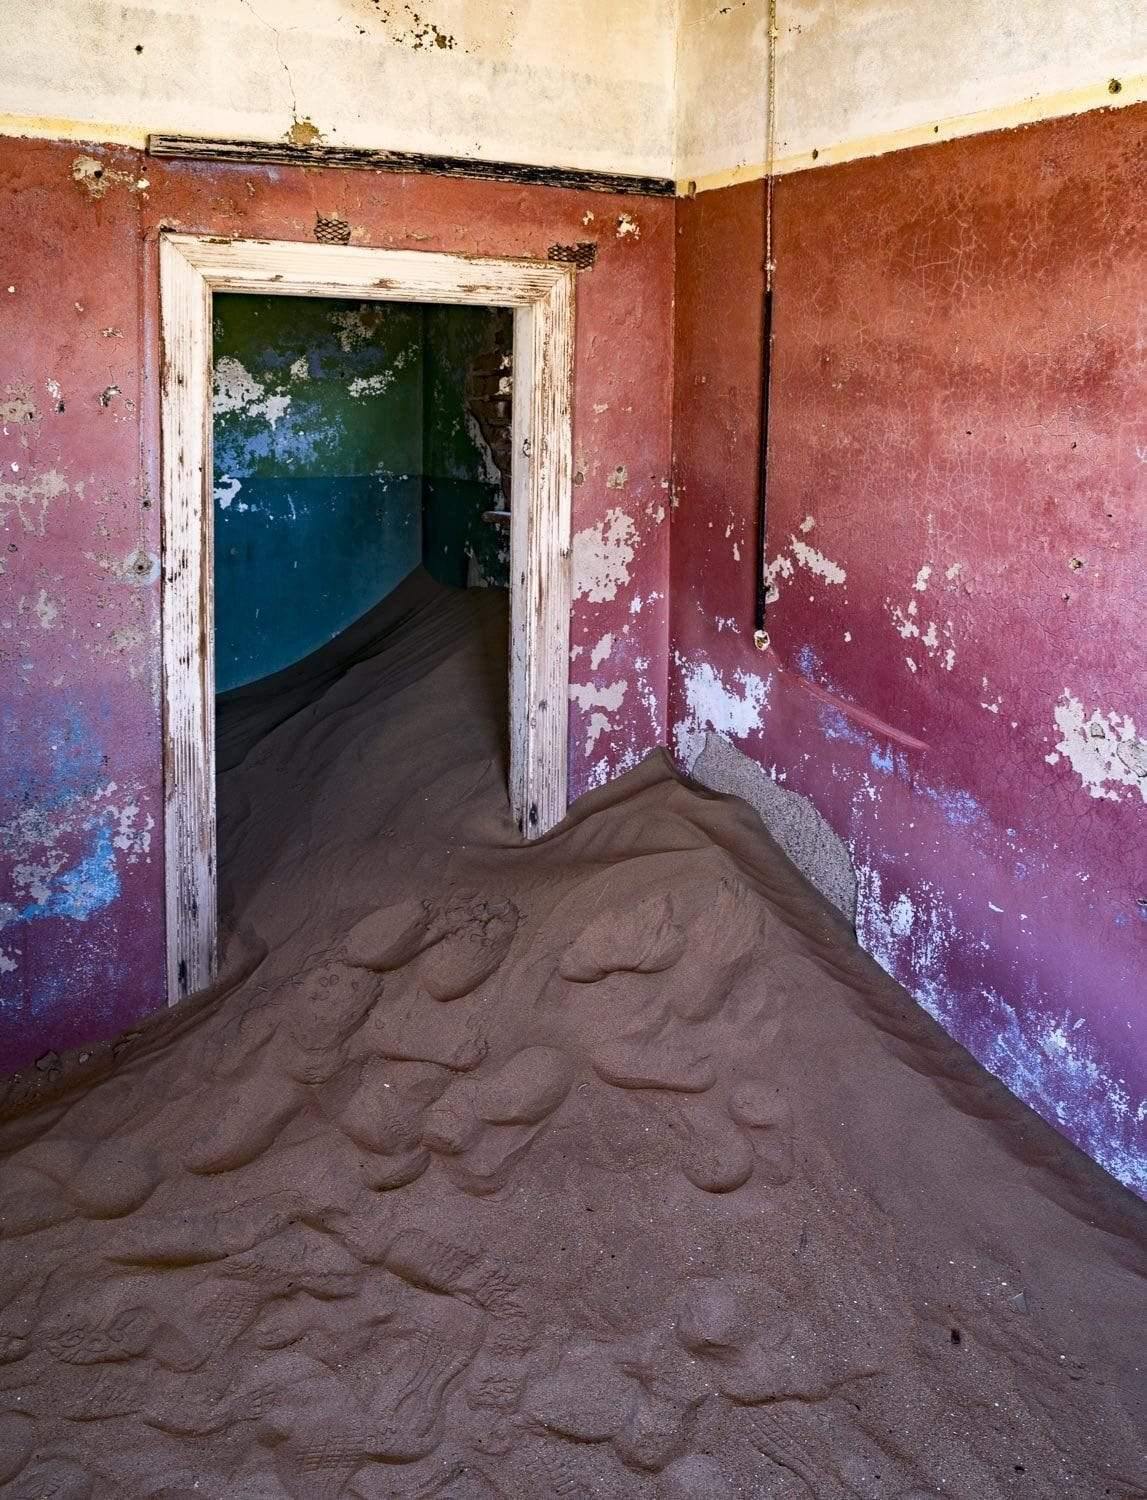 Making of a house with some sand in a room, Kolmanskop #14